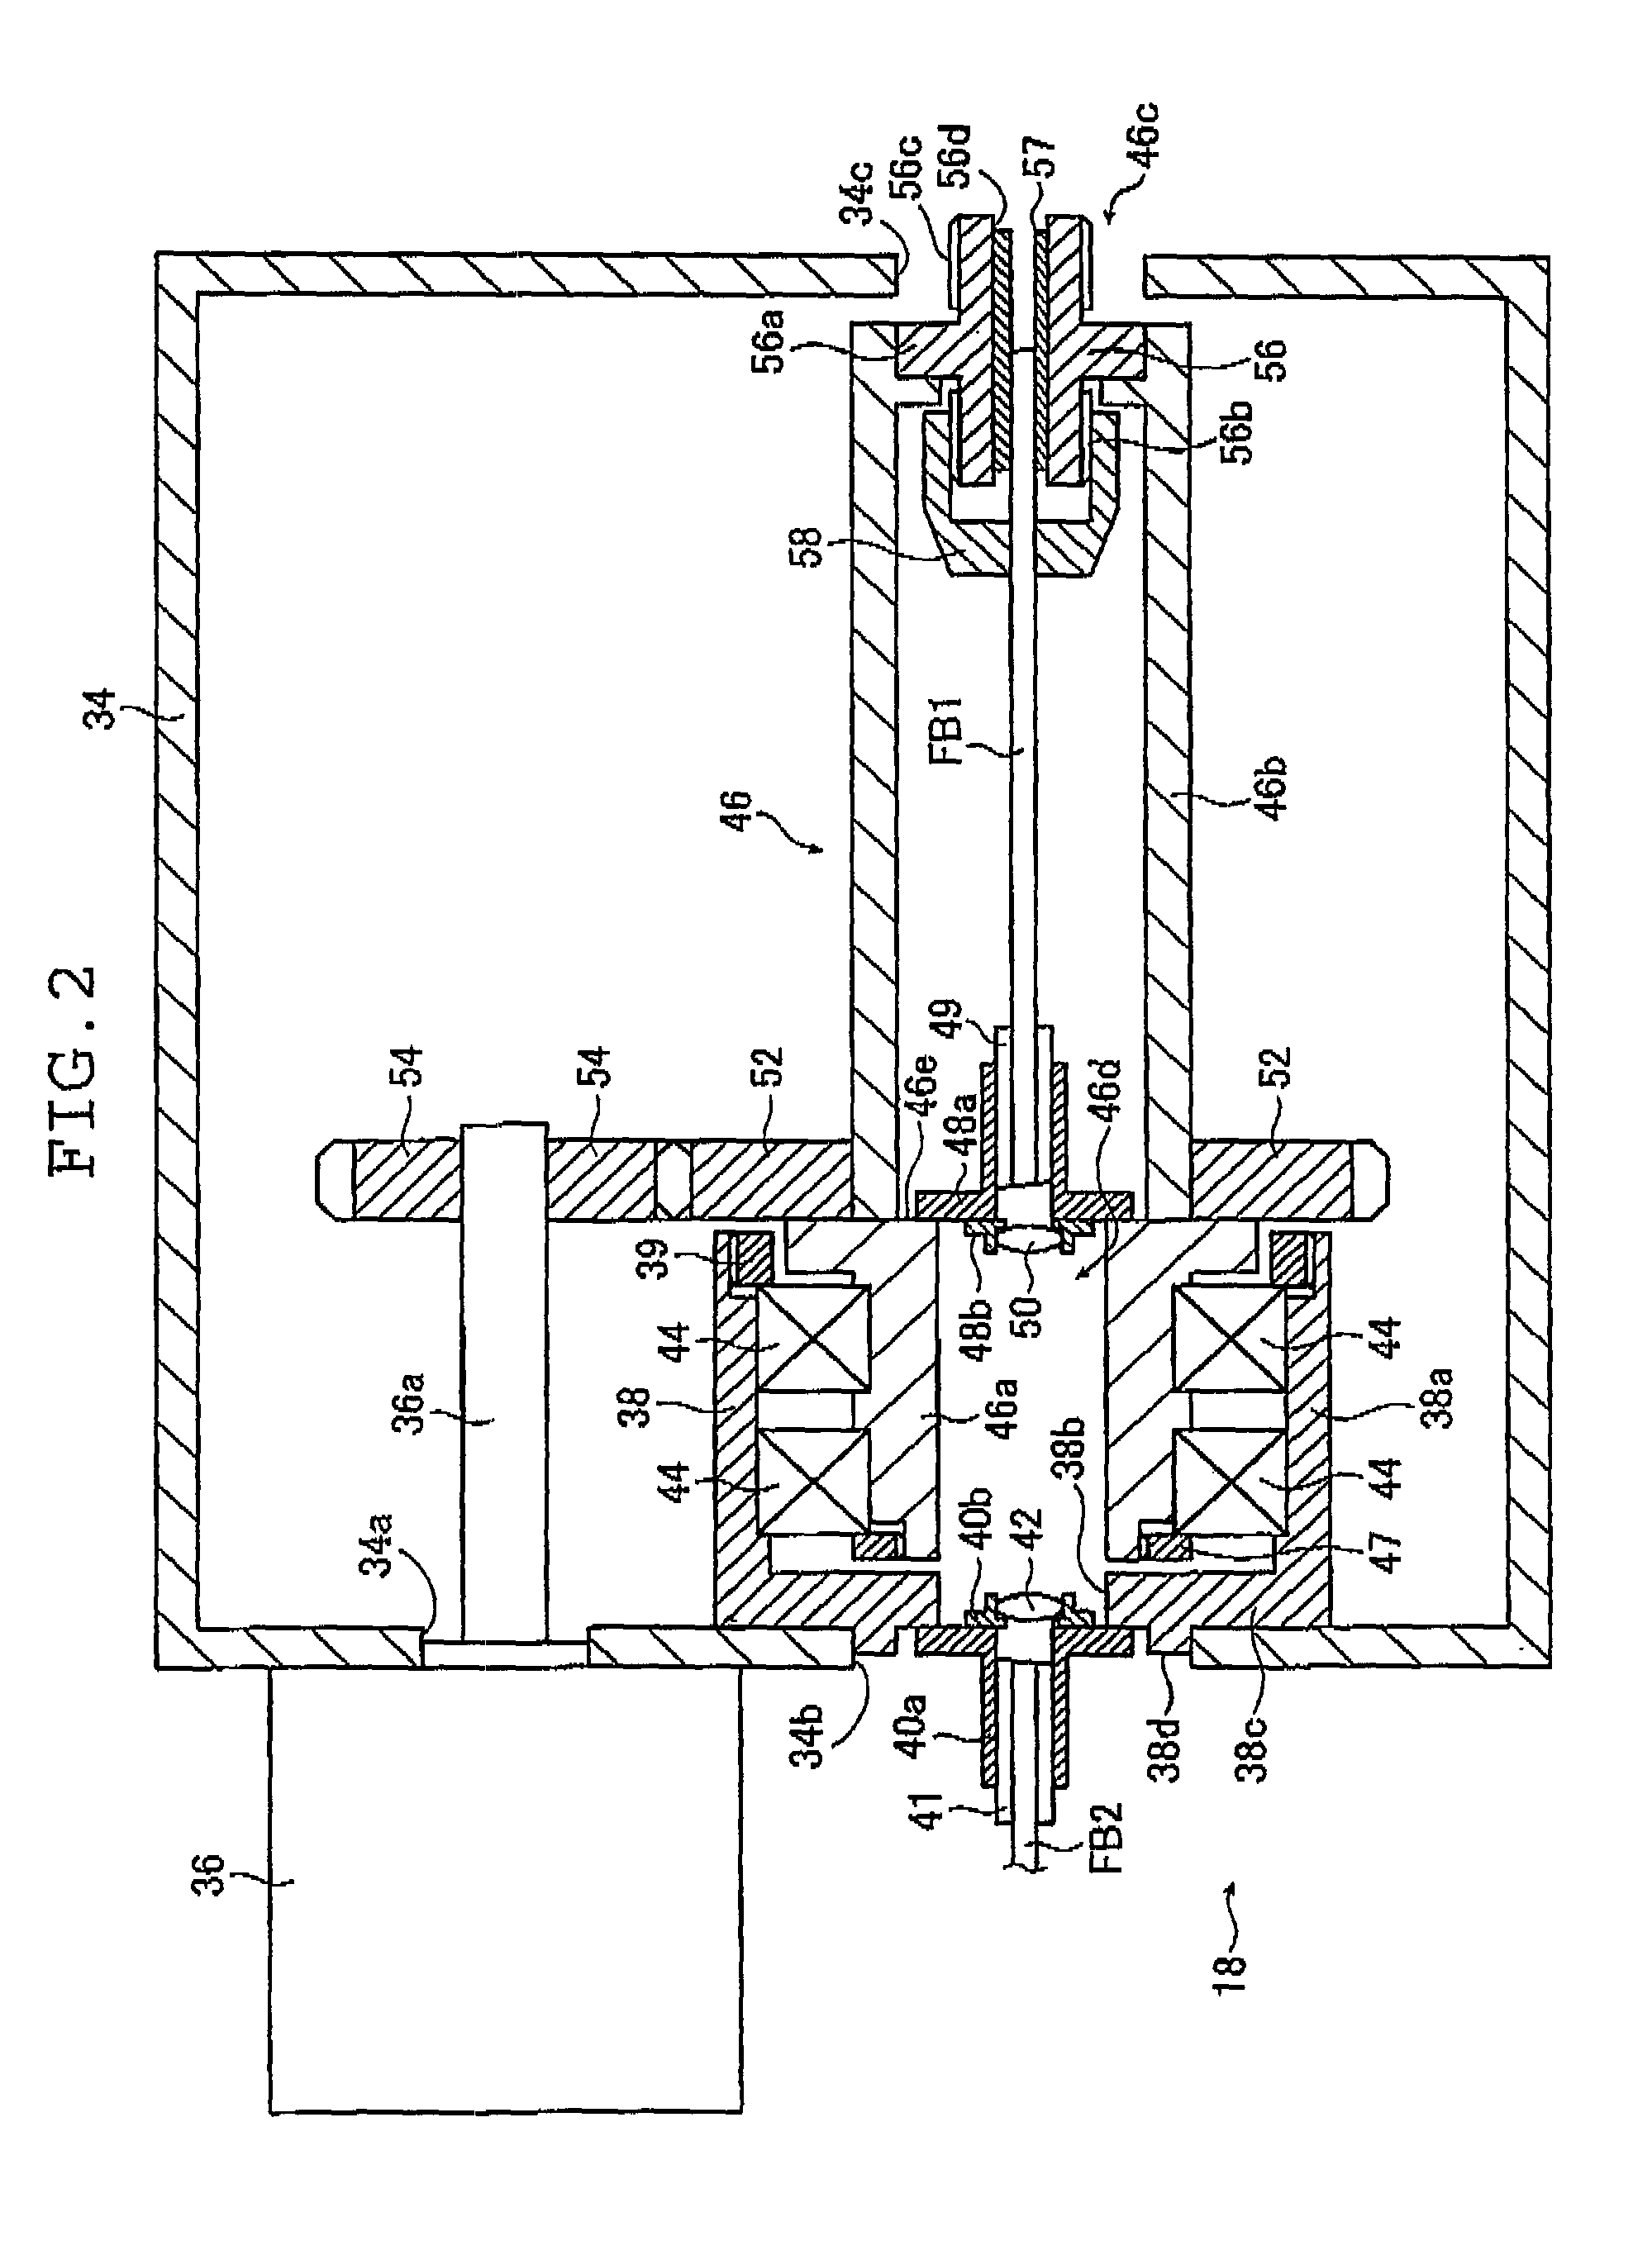 Optical rotary adapter and optical tomographic imaging system using the same